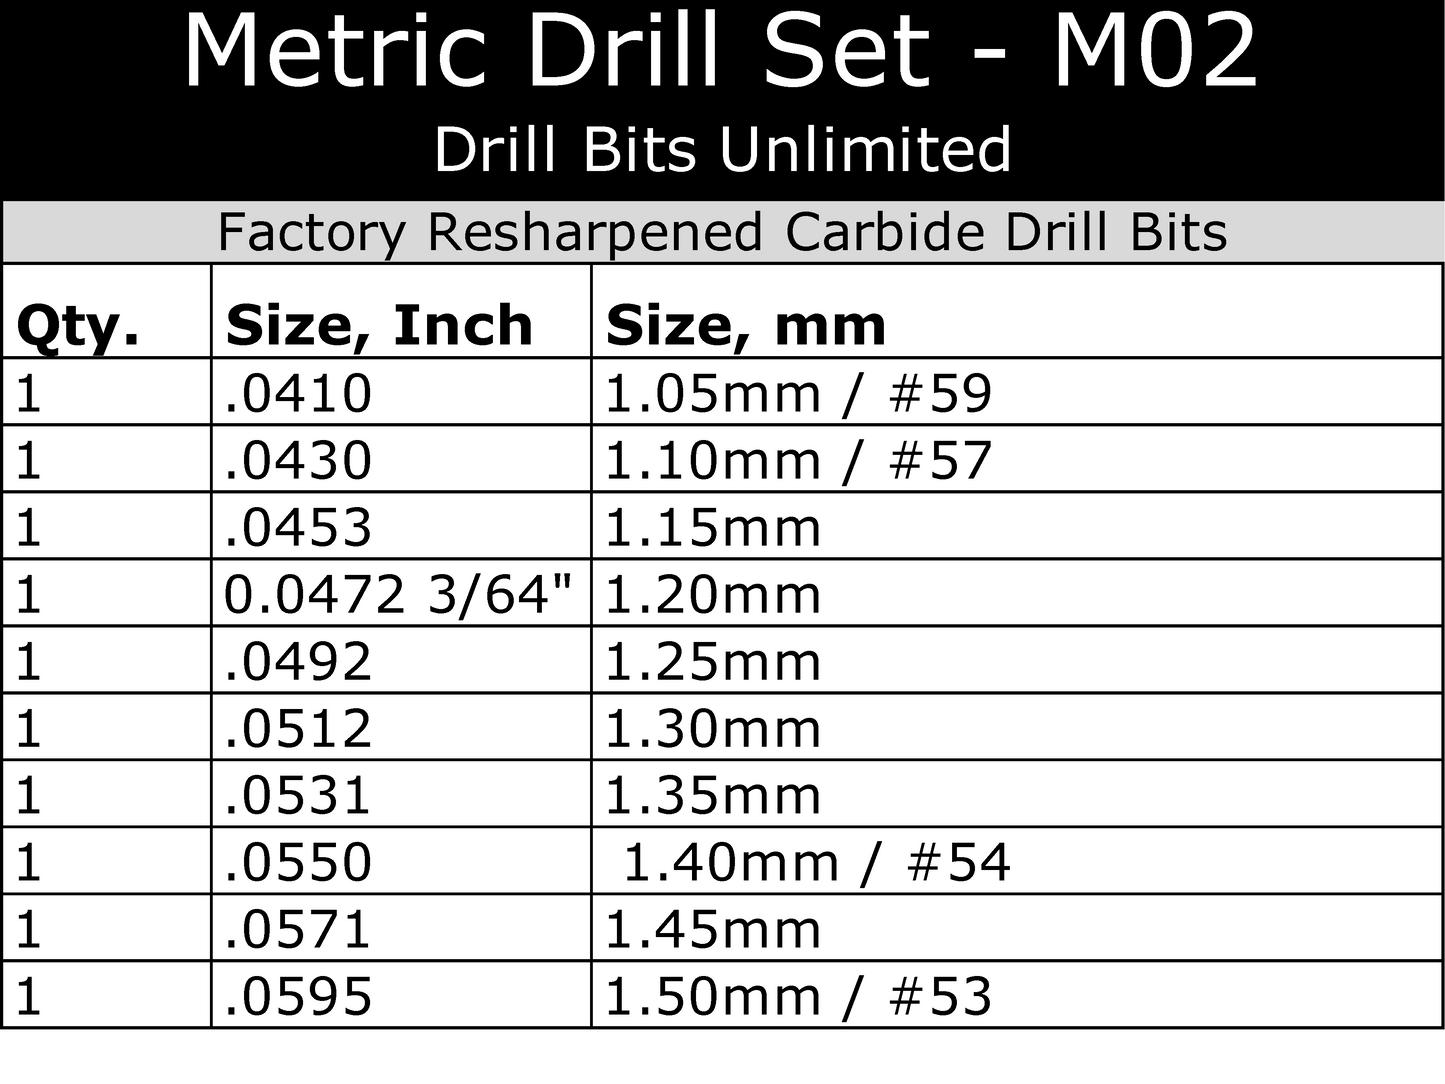  This Incremental Size Solid Carbide Drill Set includes .041 1.05mm #59 .043 1.1mm #57 .045 1.15mm .047 3/64 1.2mm .051 1.3mm .053 1.35mm .055 1.4mm #54 .057 1.45mm .059 1.5mm #53